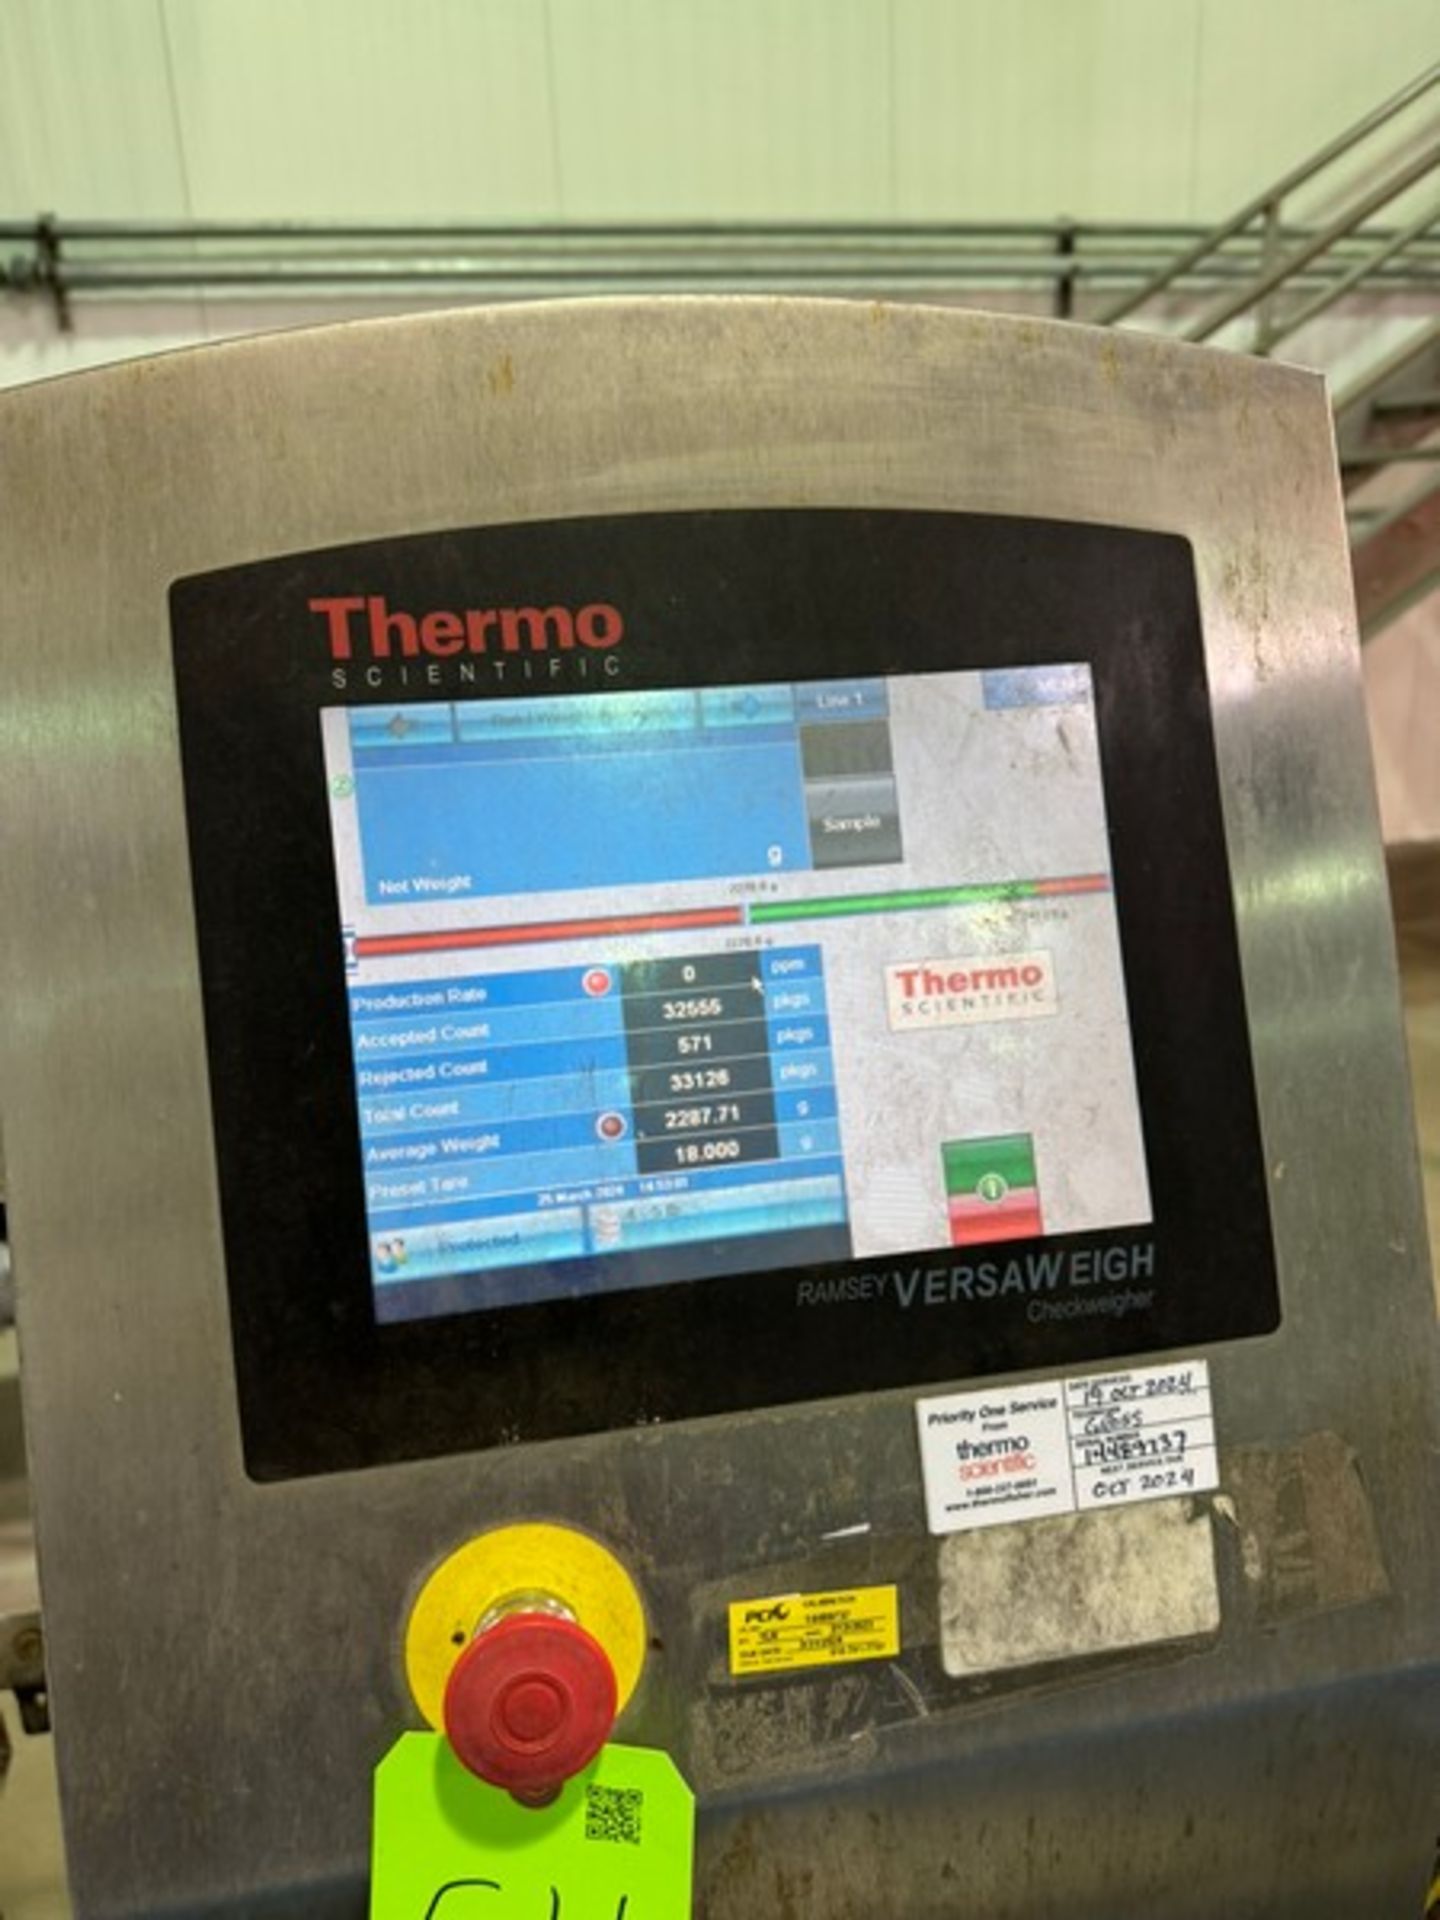 2014 Thermo Scientific Ramsey VersaWeigh Combo Metal Detector / Checkweigher, S/N 14489737, - Image 10 of 10